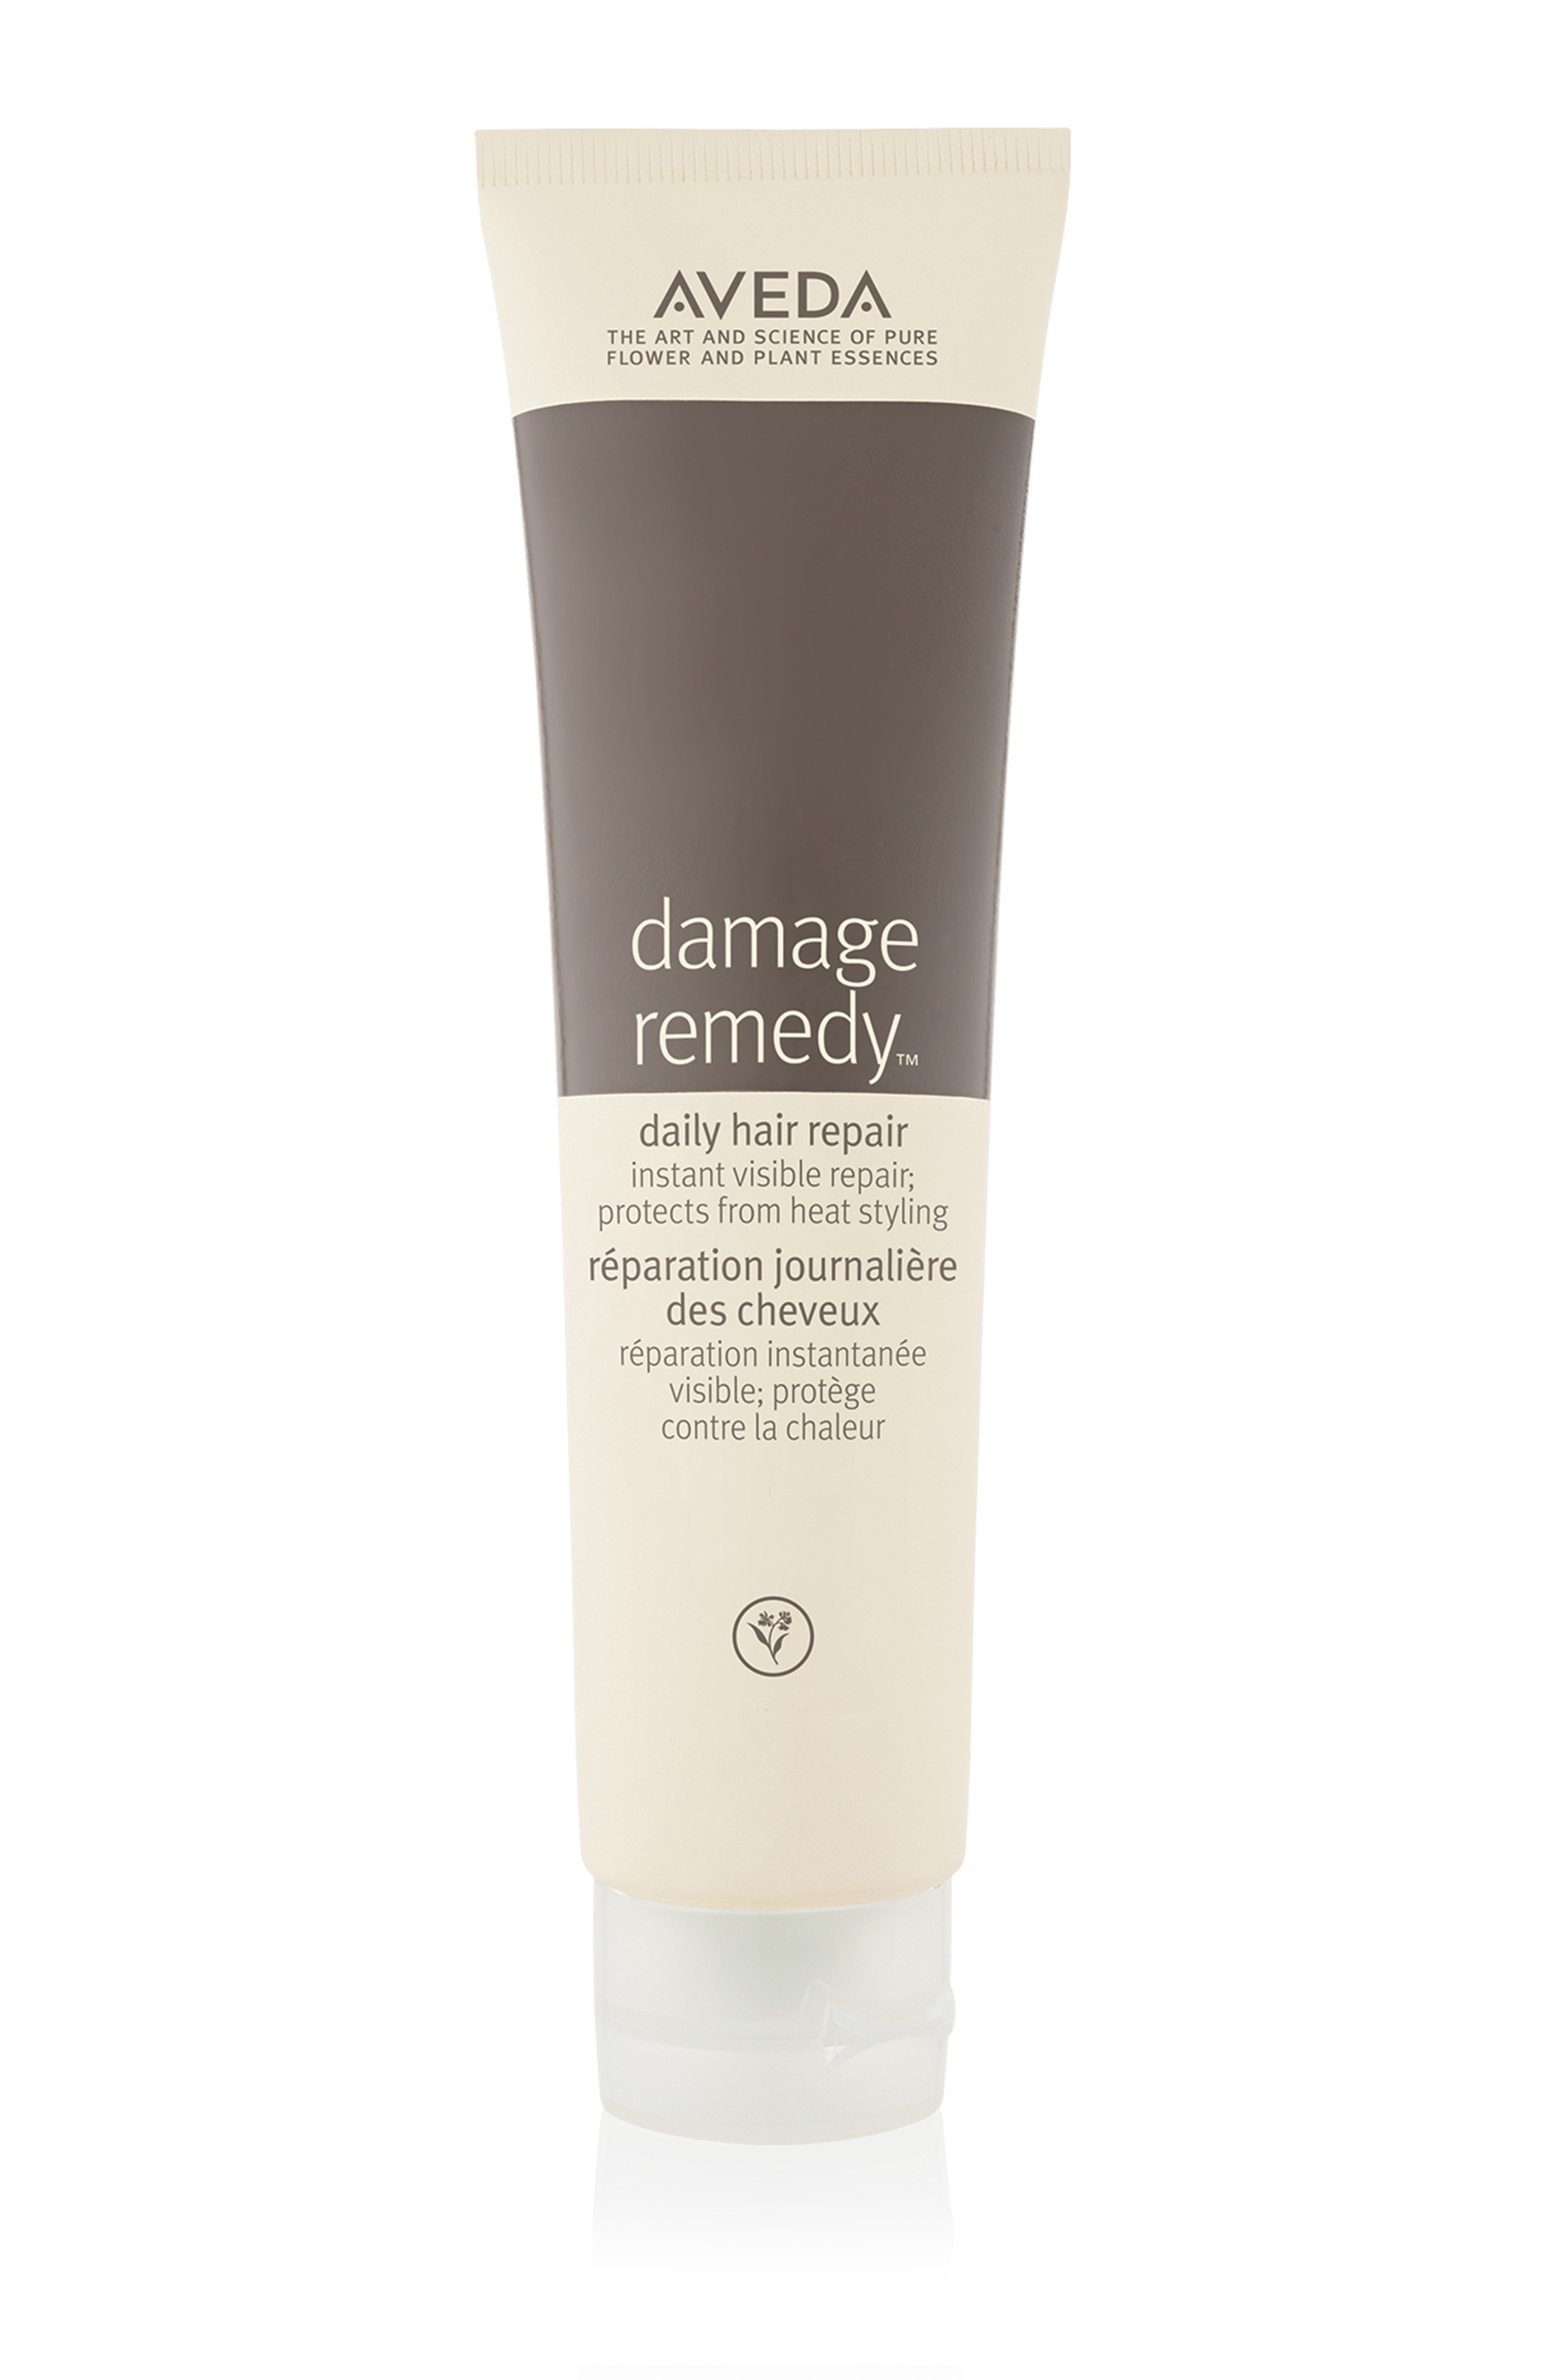 Aveda damage remedy ristrutturante quotidiano 100 ml, Bianco/Marrone, large image number 0